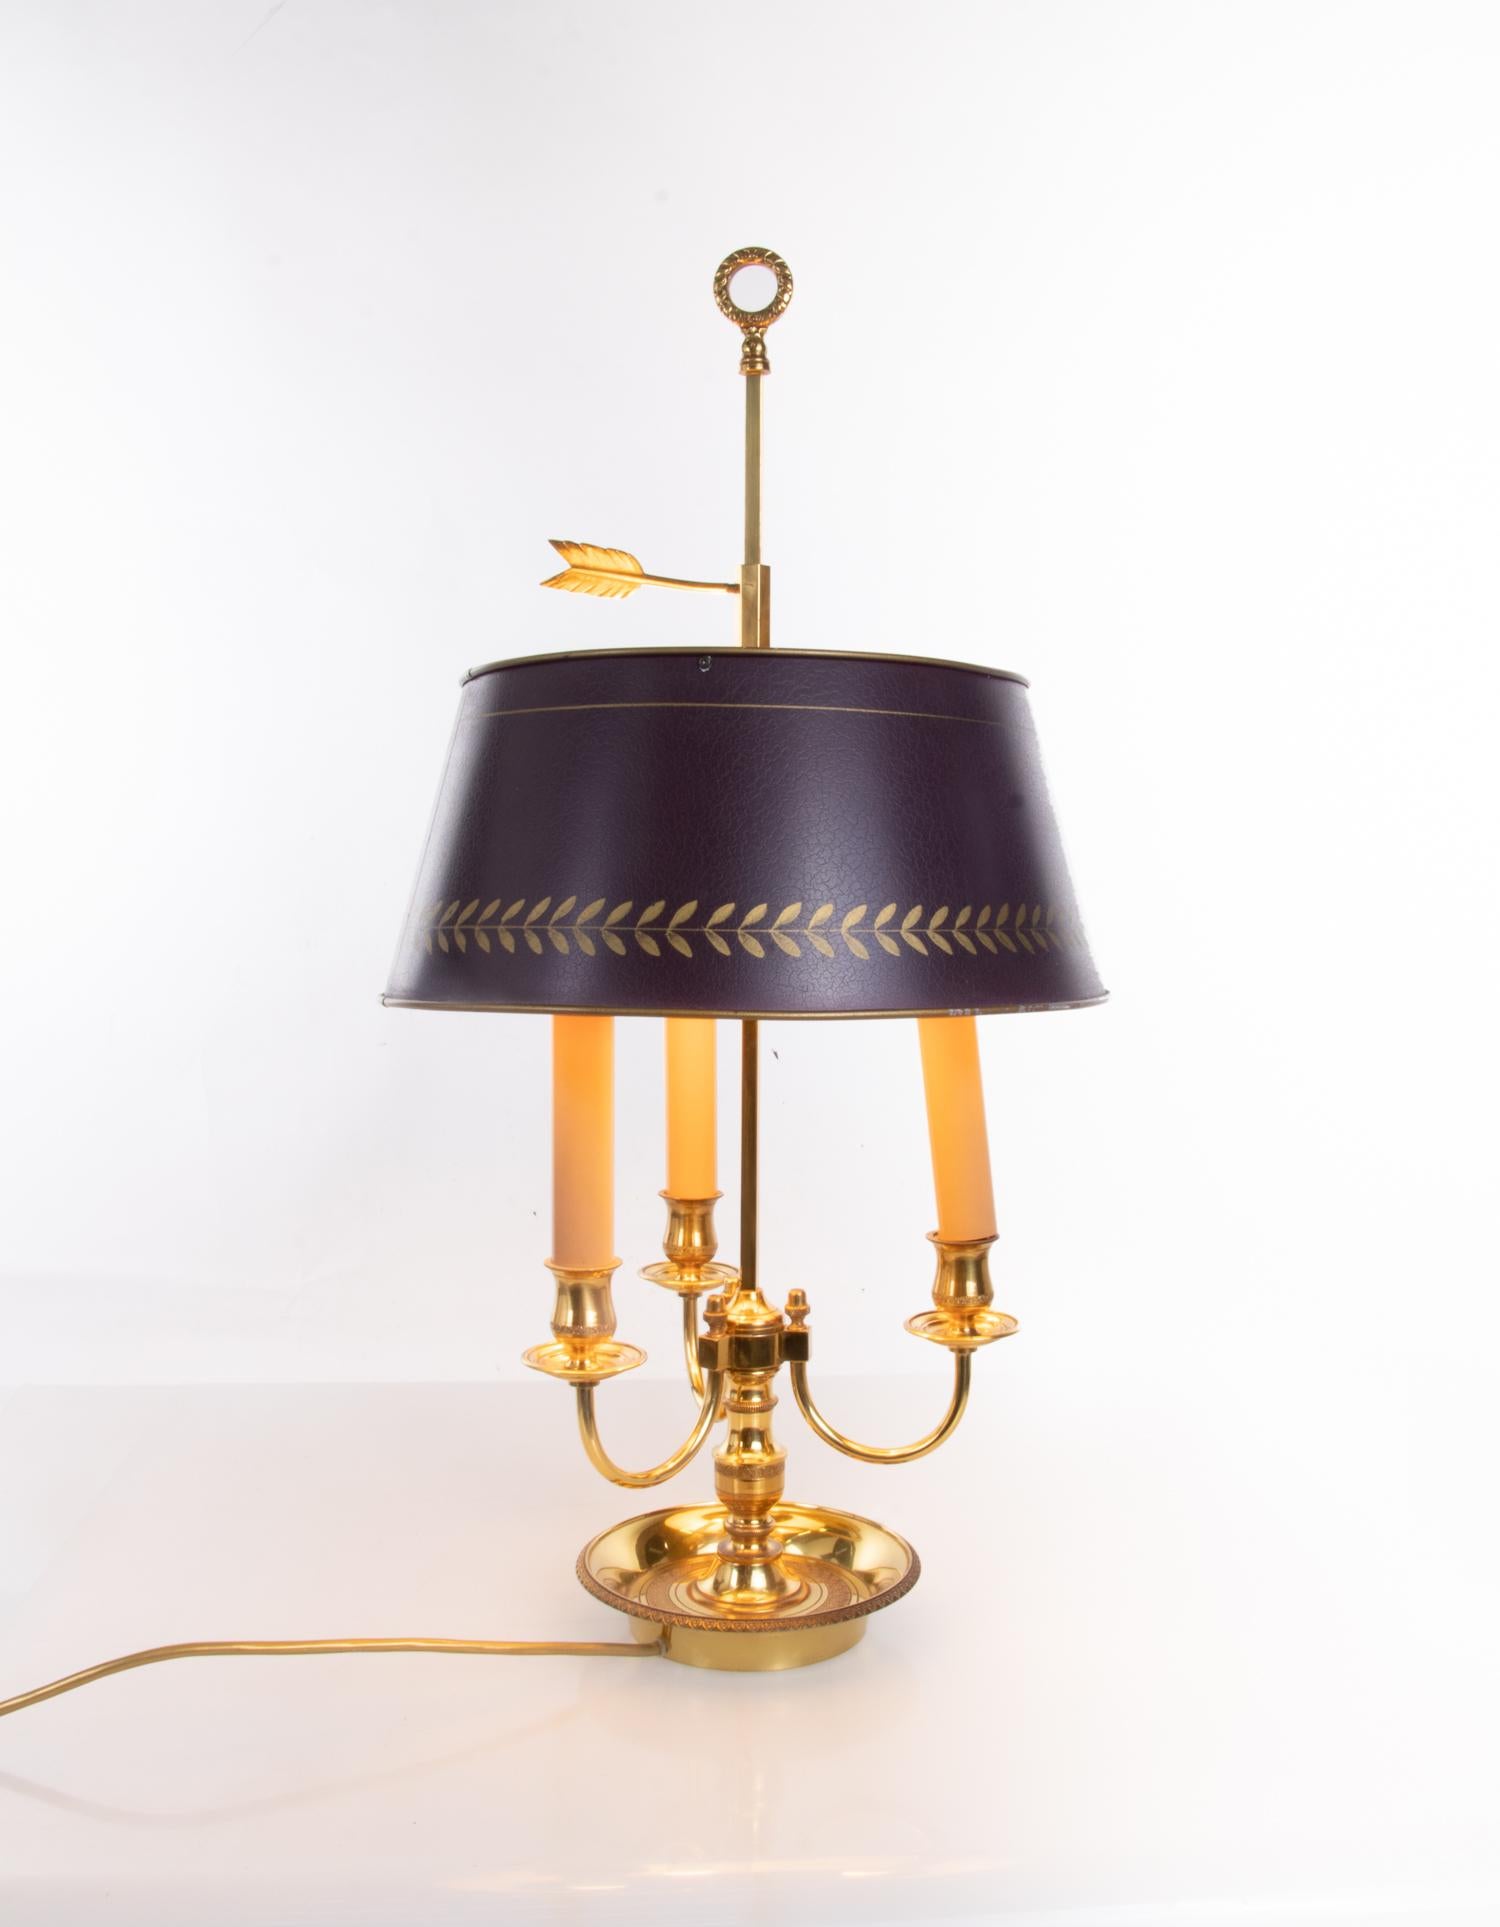 Elegant French bronze Louis XV style Bouillotte lamp with an adjustable painted metal shade and three electrified candle- arms. 

Measures: Height 25.6